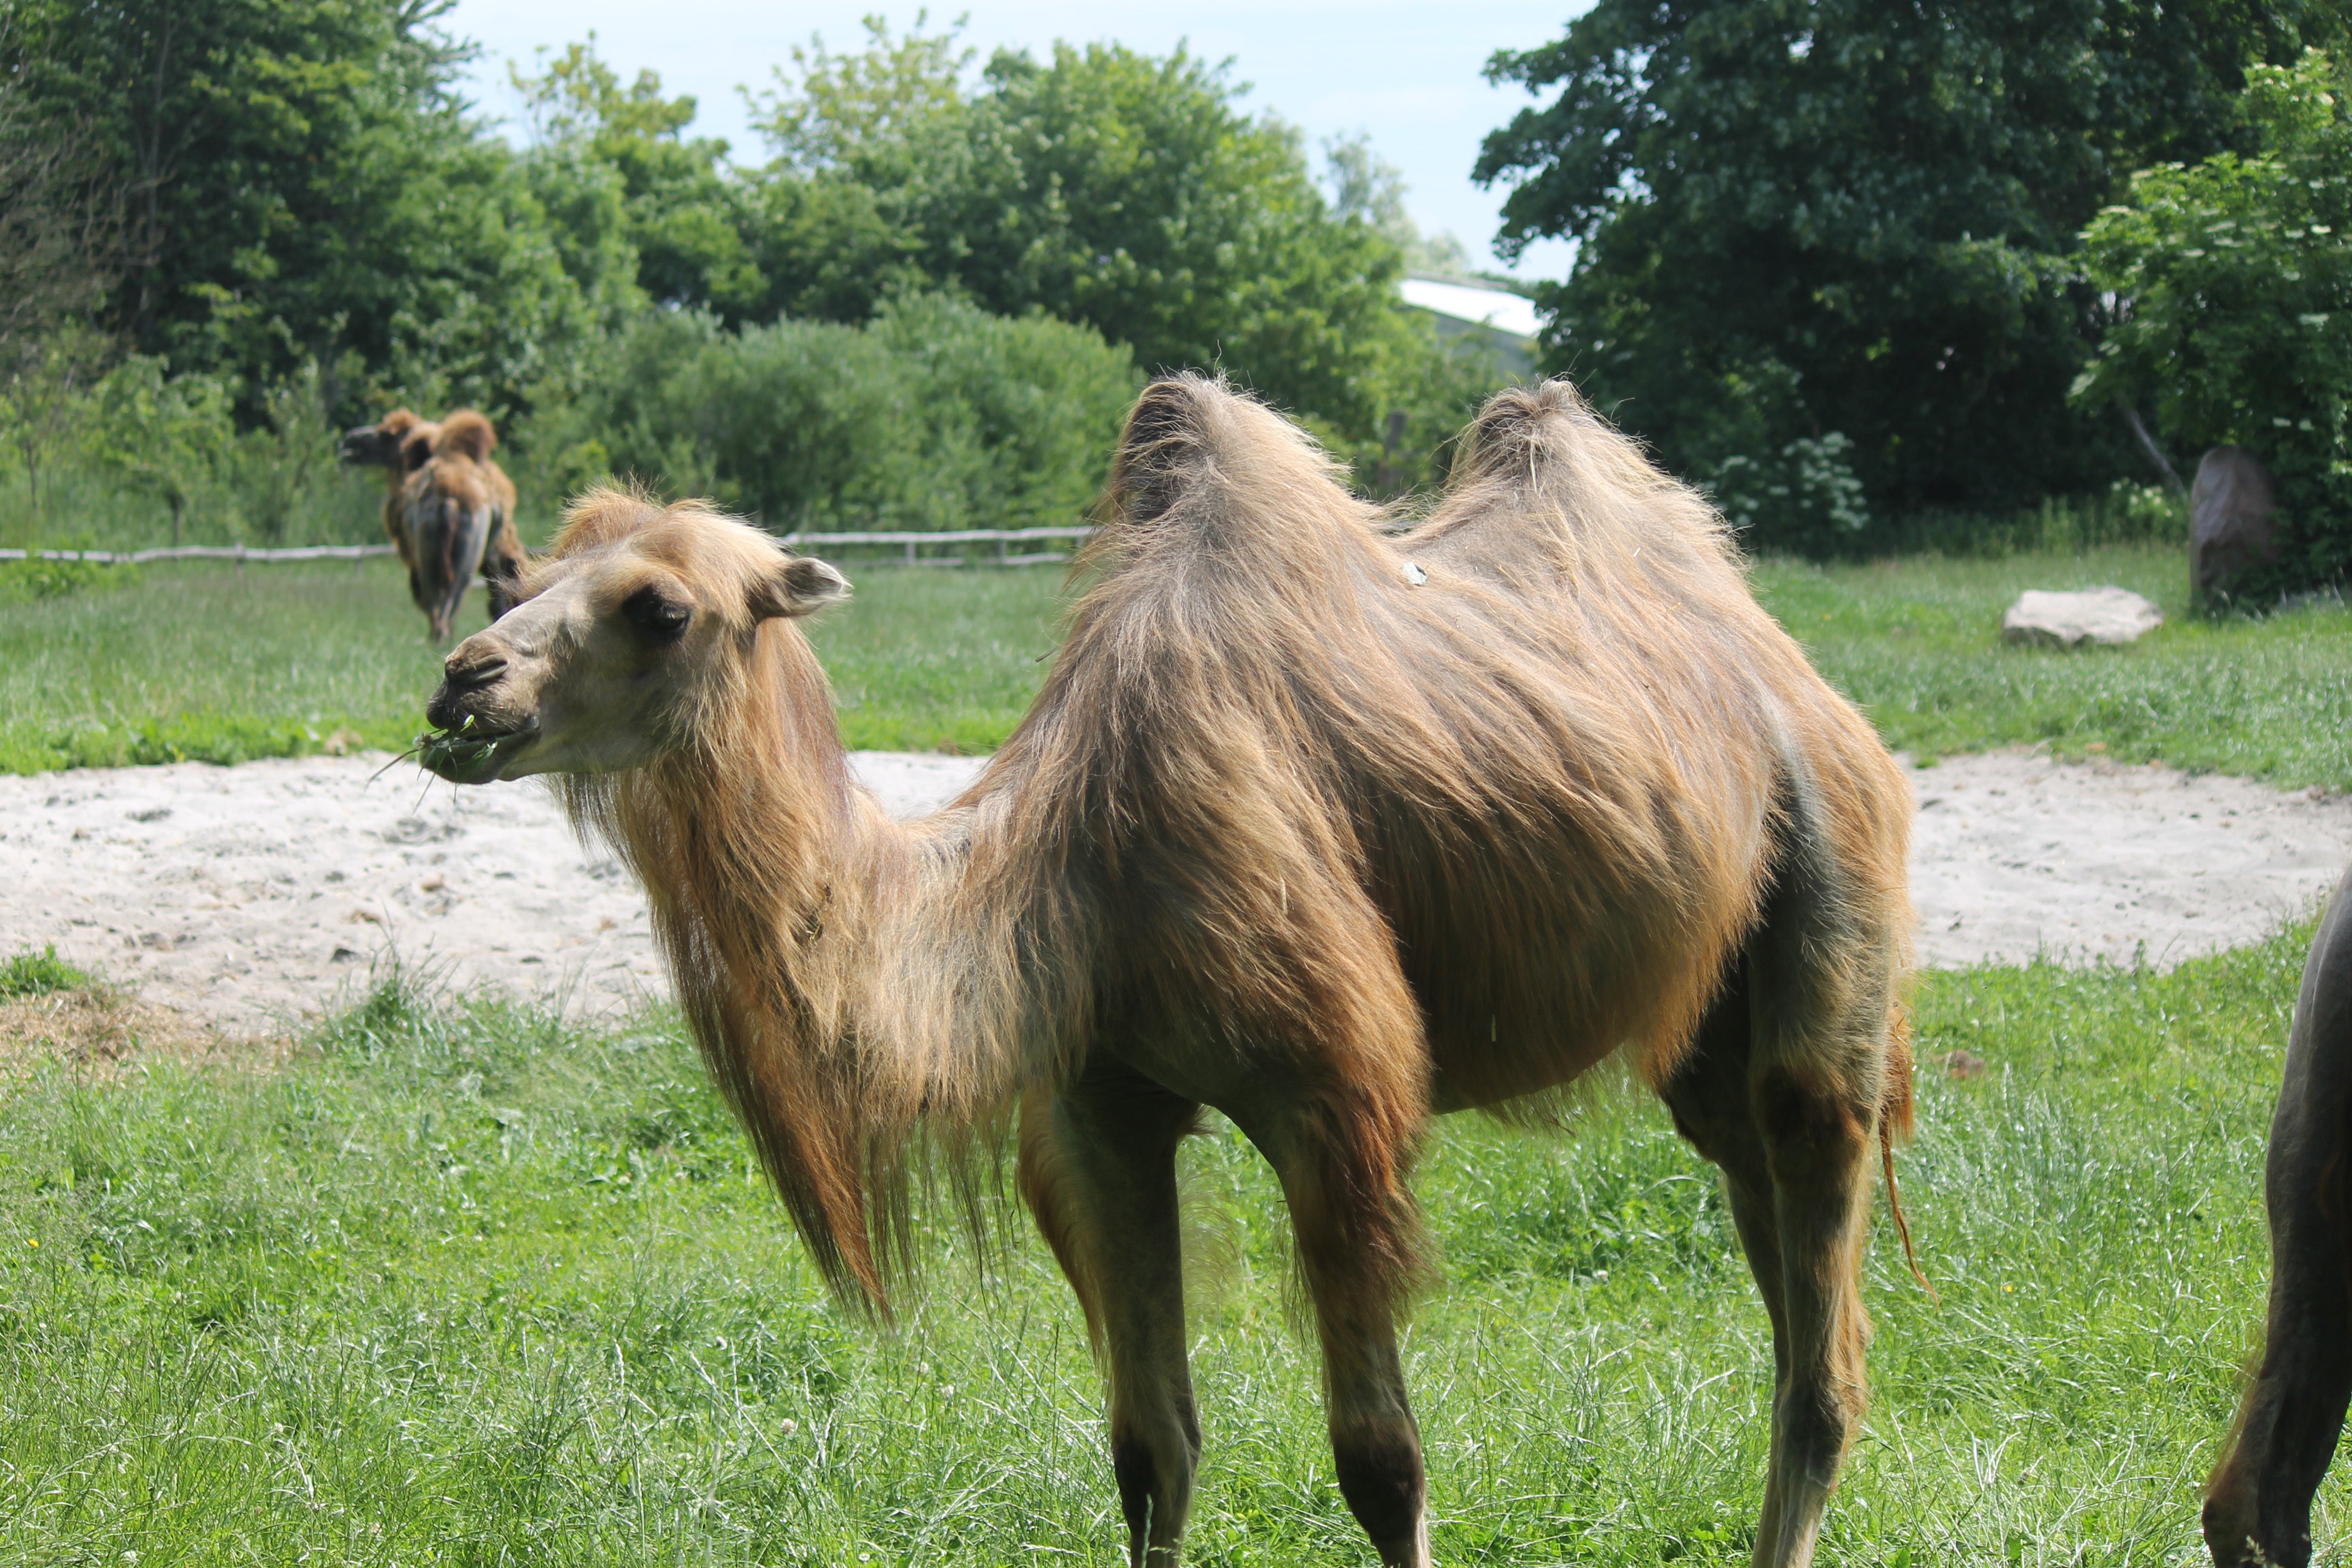 A zookeeper is in hospital with serious injuries after being bitten by a camel in northern Germany